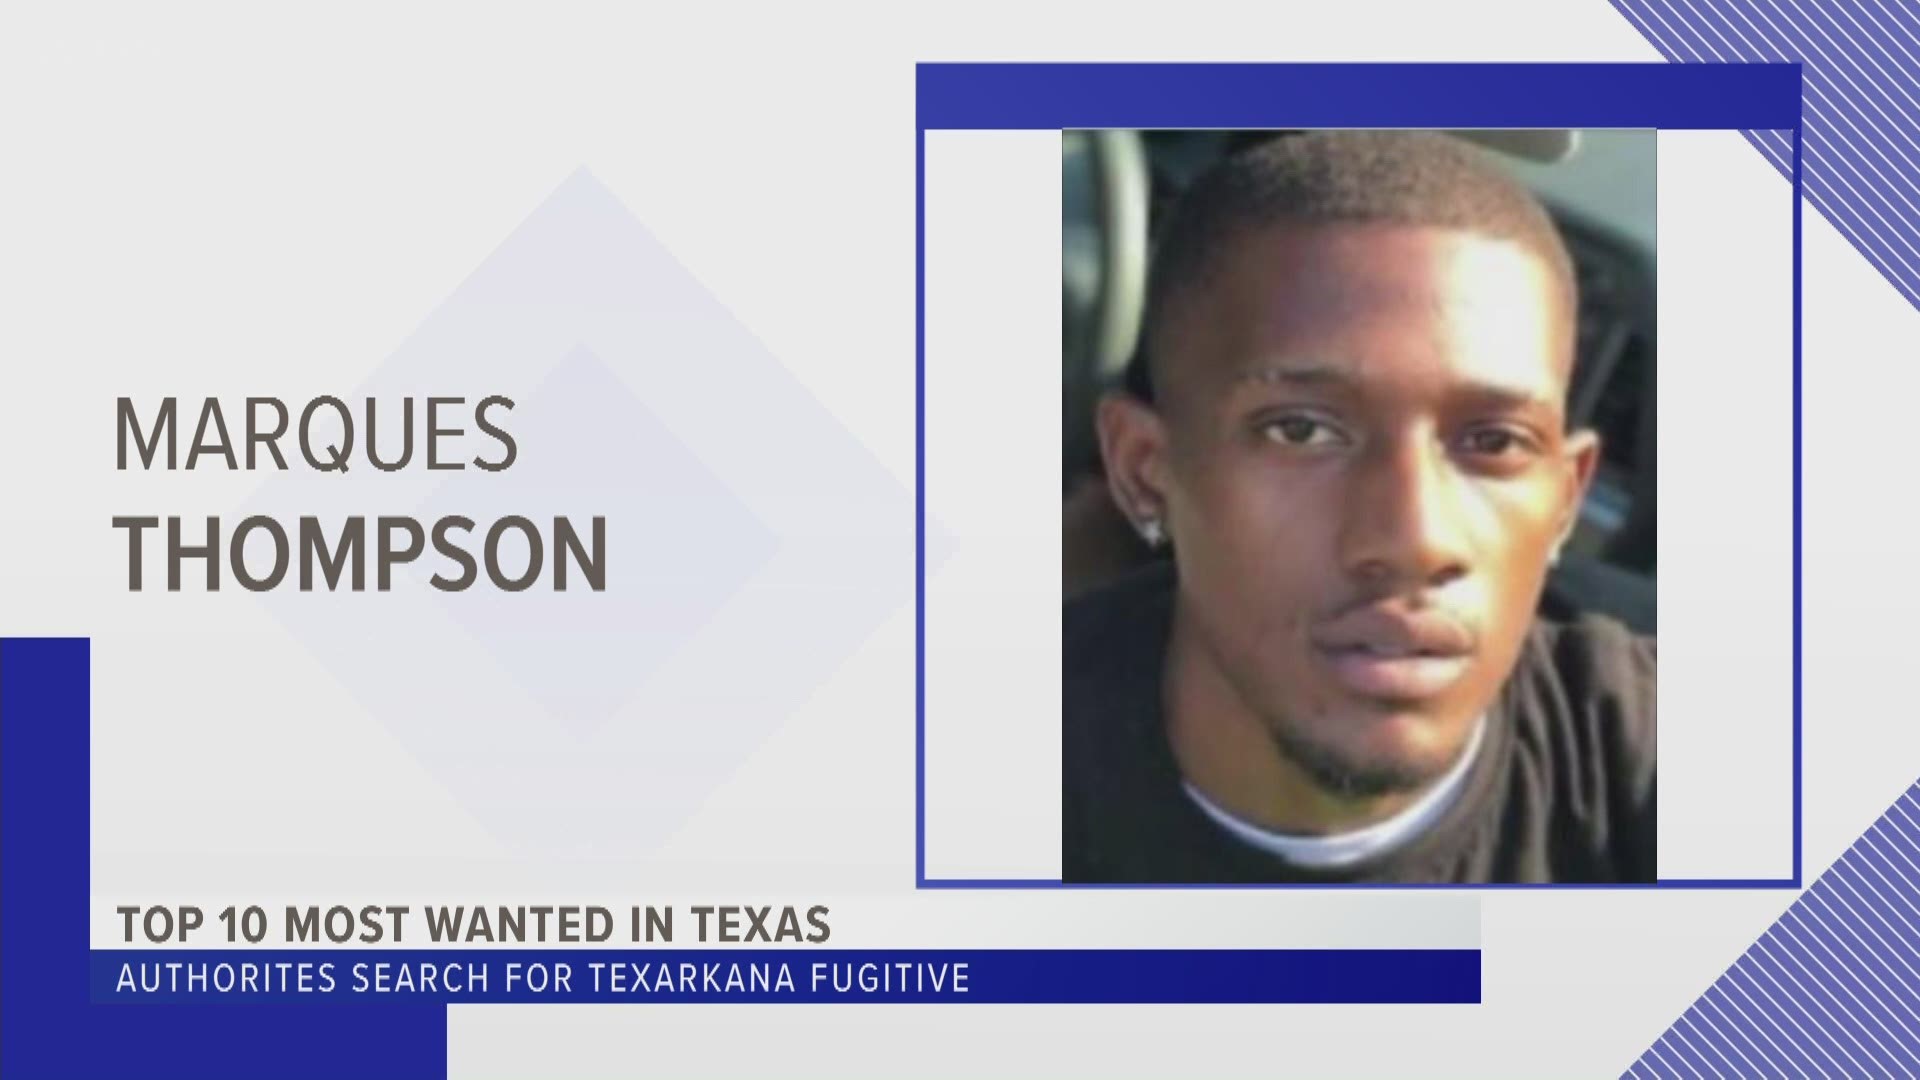 Marques Jujuan Thompson has been added to the Texas 10 Most Wanted Fugitive List.